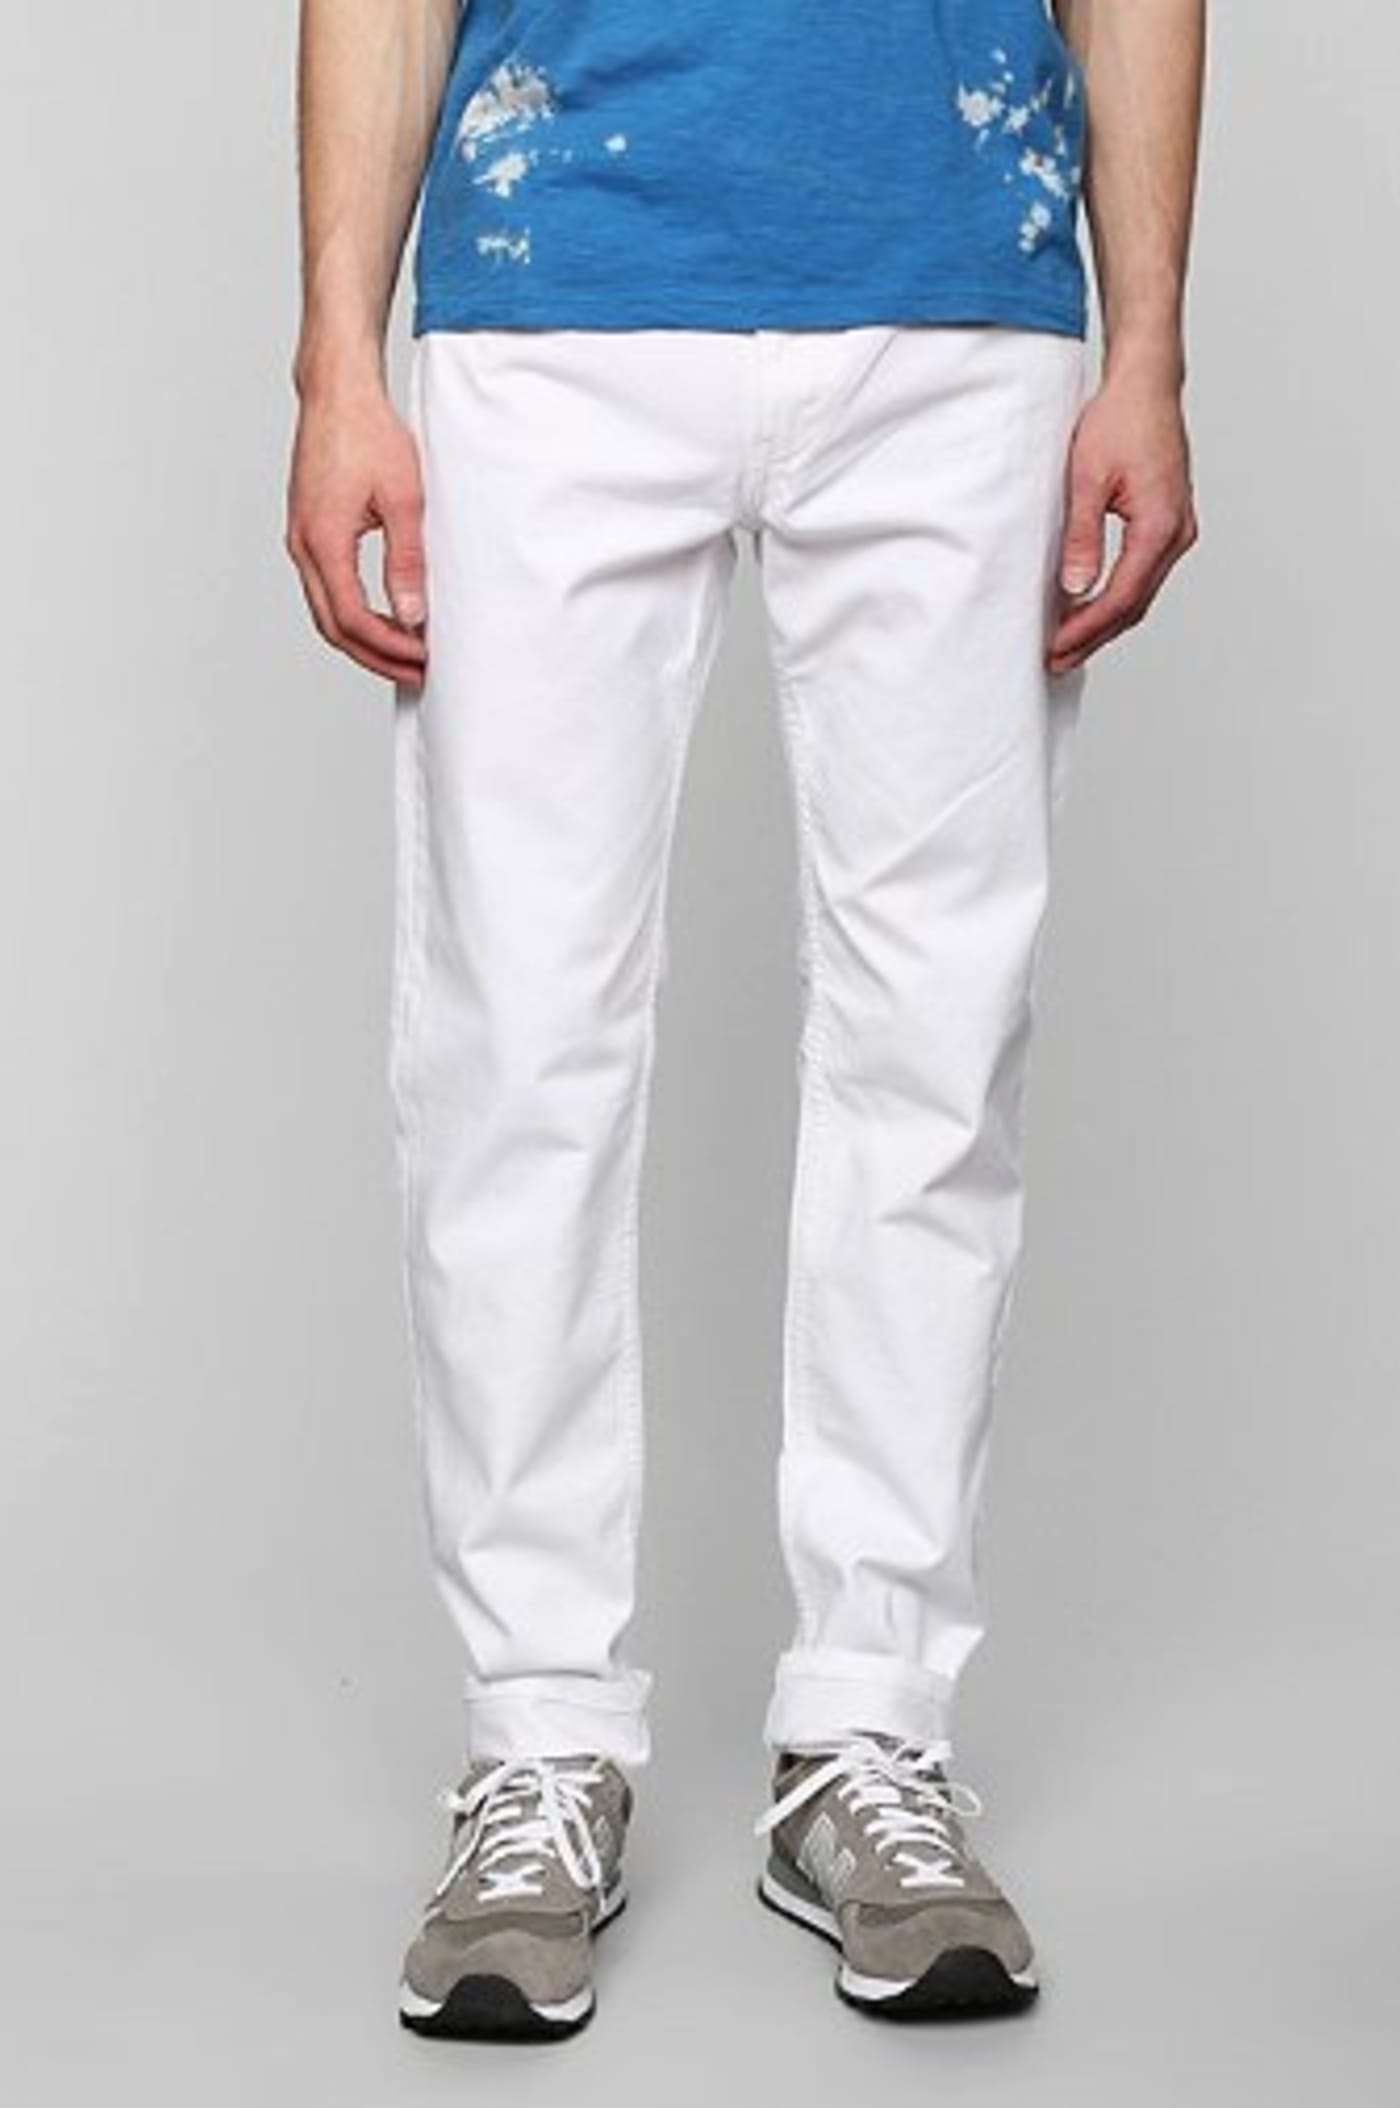 The 15 Best White Pants to Complete Your Coke Boy Outfit Complex